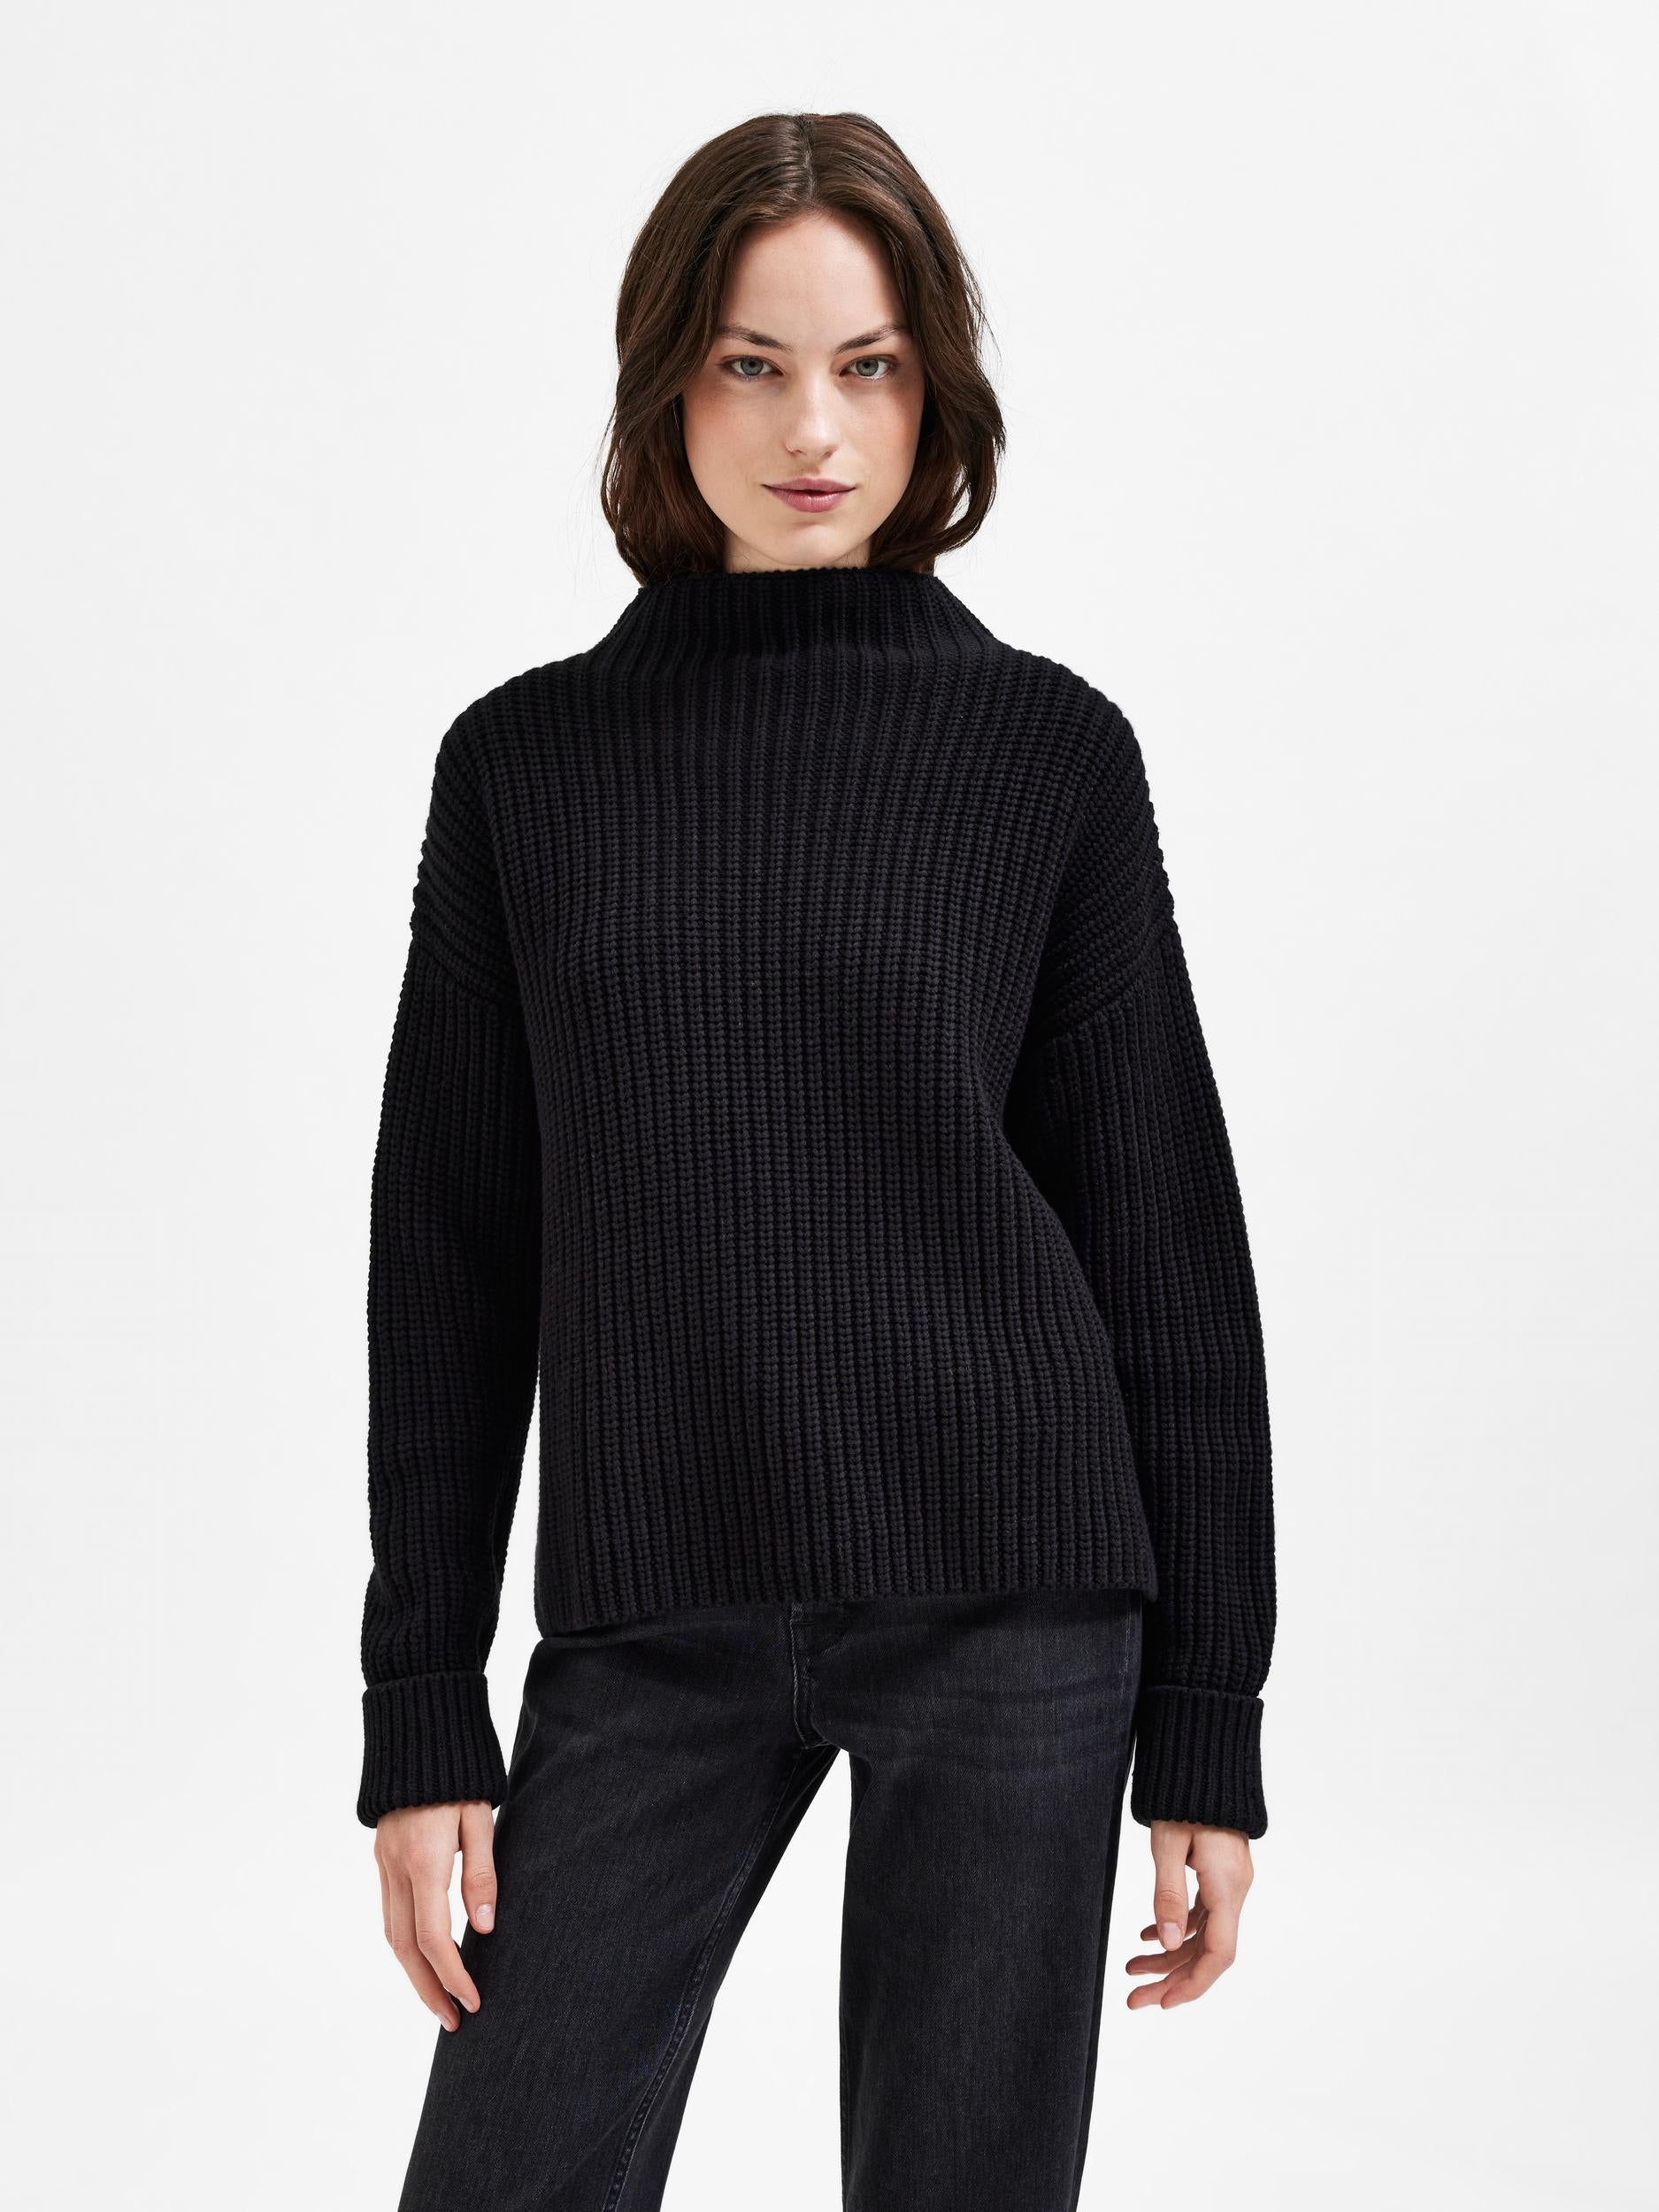 Selected Femme "Selma" Knit Pullover schwarz